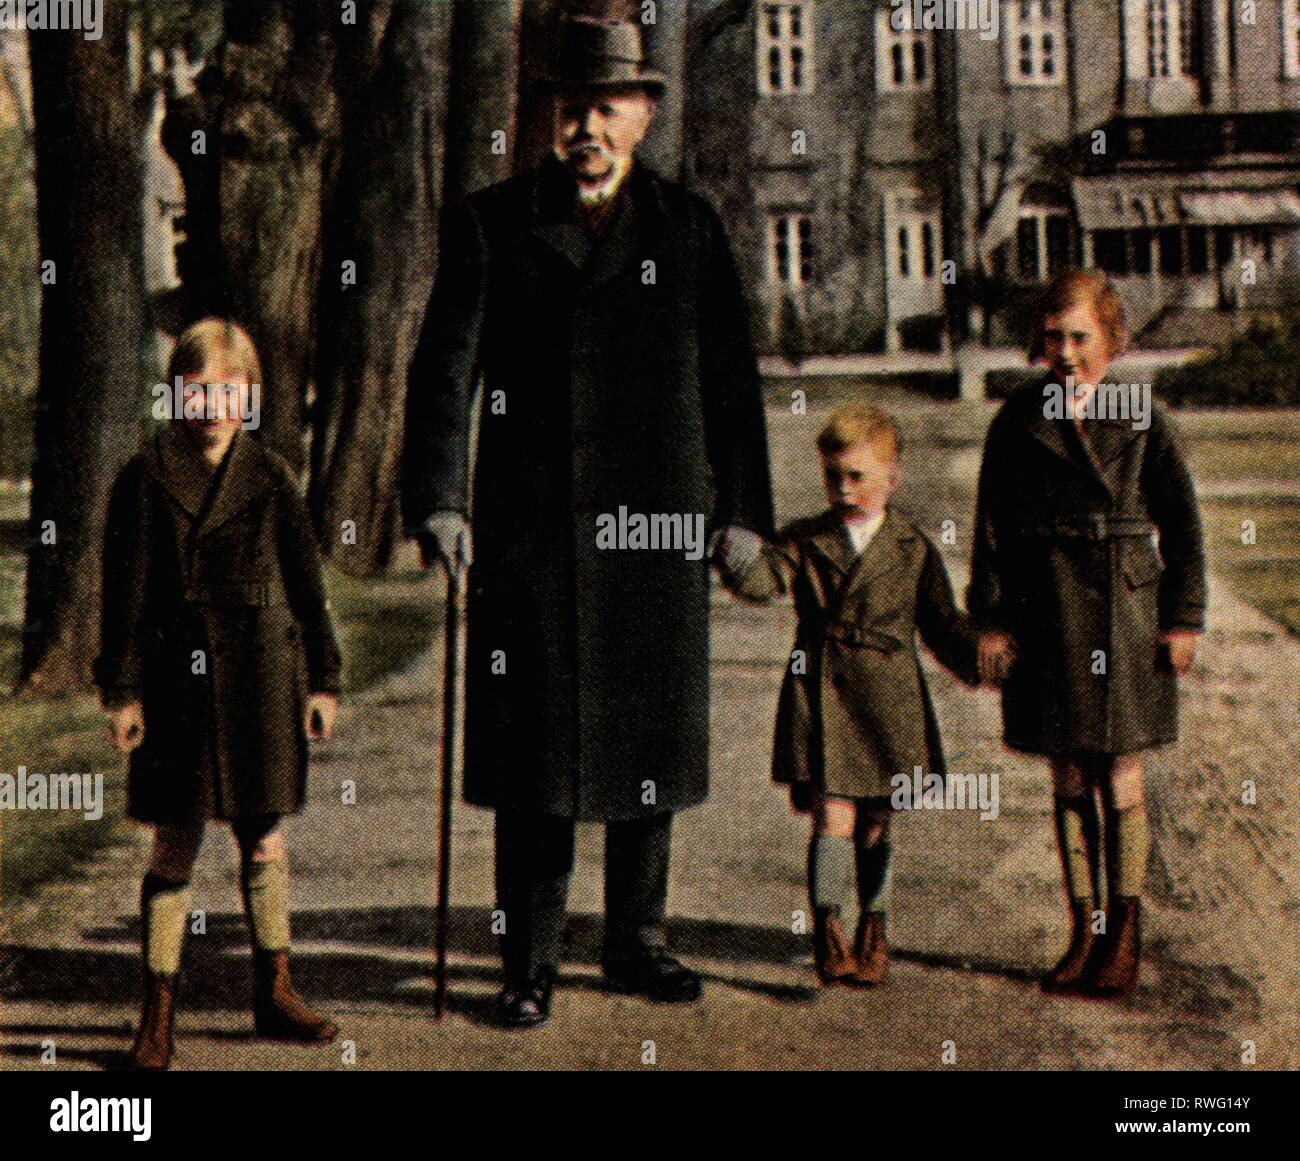 Hindenburg, Paul von, 2.10.1847 - 2.8.1934, German general and politician, President of the Reich 12.5.1925 - 2.8.1934, full length, at his 85th birthday, with three of his grandchildren, garden of the Palais of the President of the Reich, Berlin, 2.10.1932, coloured photograph, cigarette card, series 'Die Nachkriegszeit', 1935, Additional-Rights-Clearance-Info-Not-Available Stock Photo